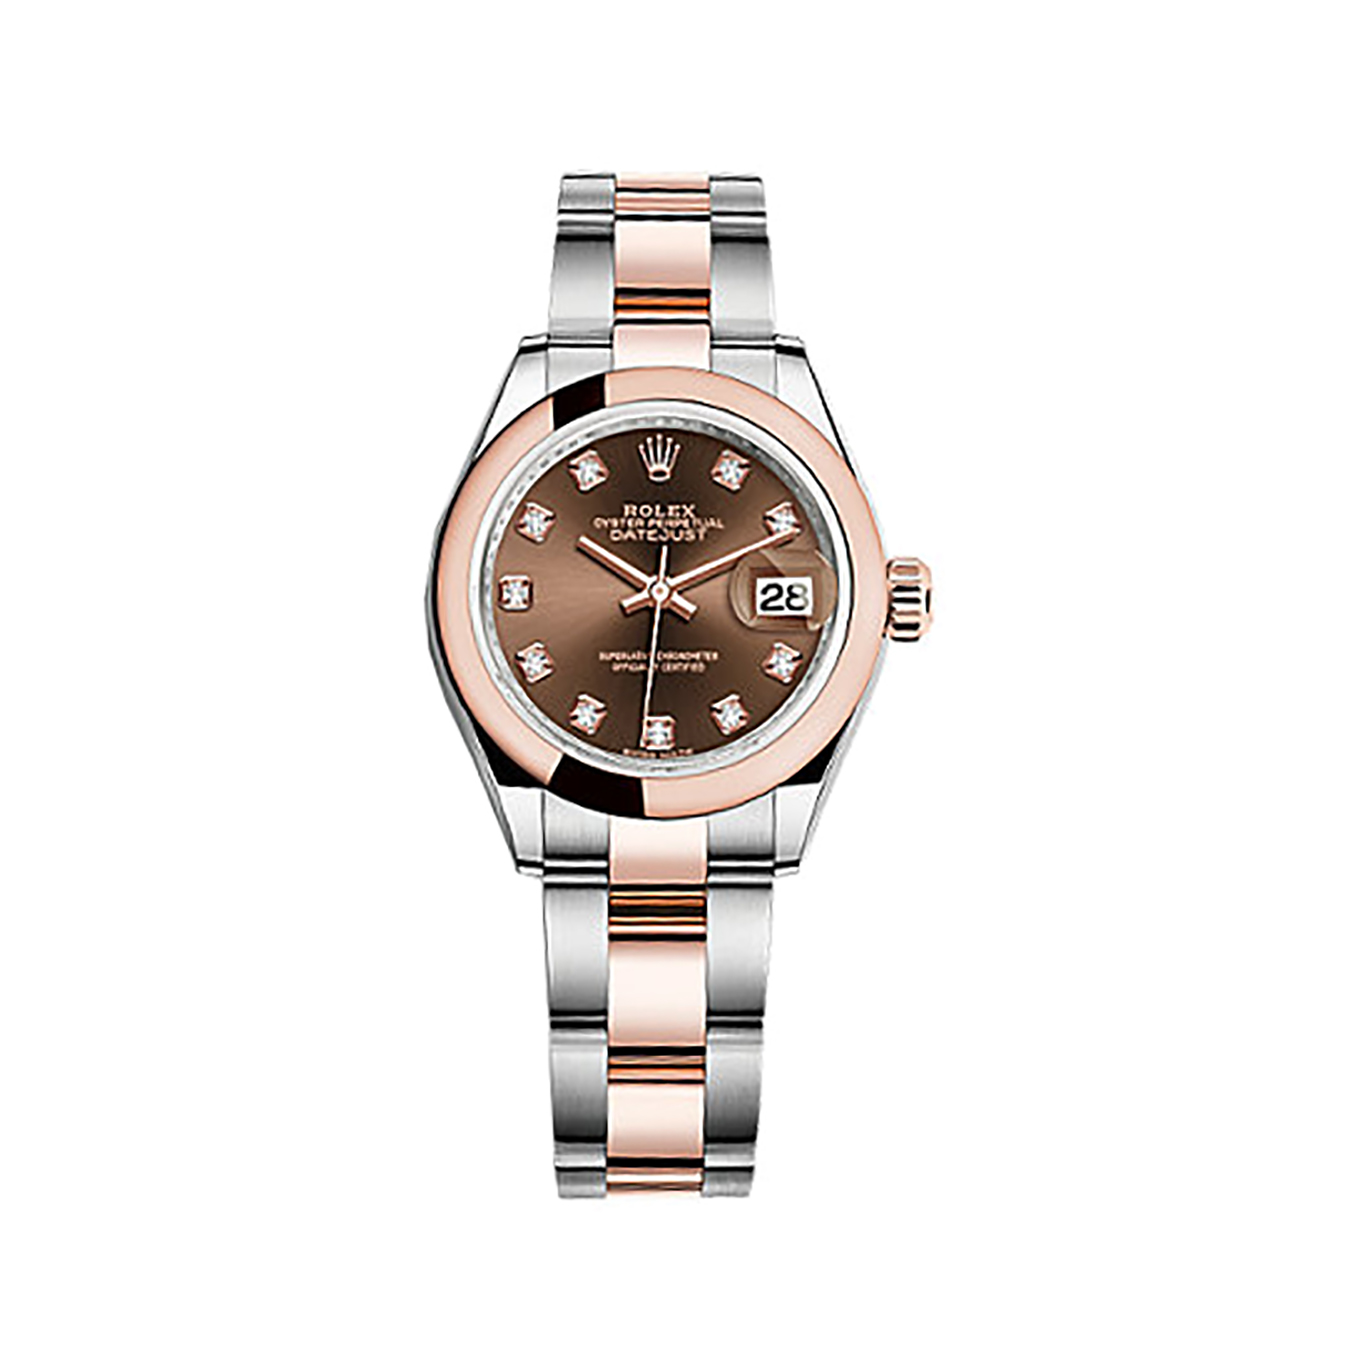 Lady-Datejust 28 279161 Rose Gold & Stainless Steel Watch (Chocolate Set with Diamonds)